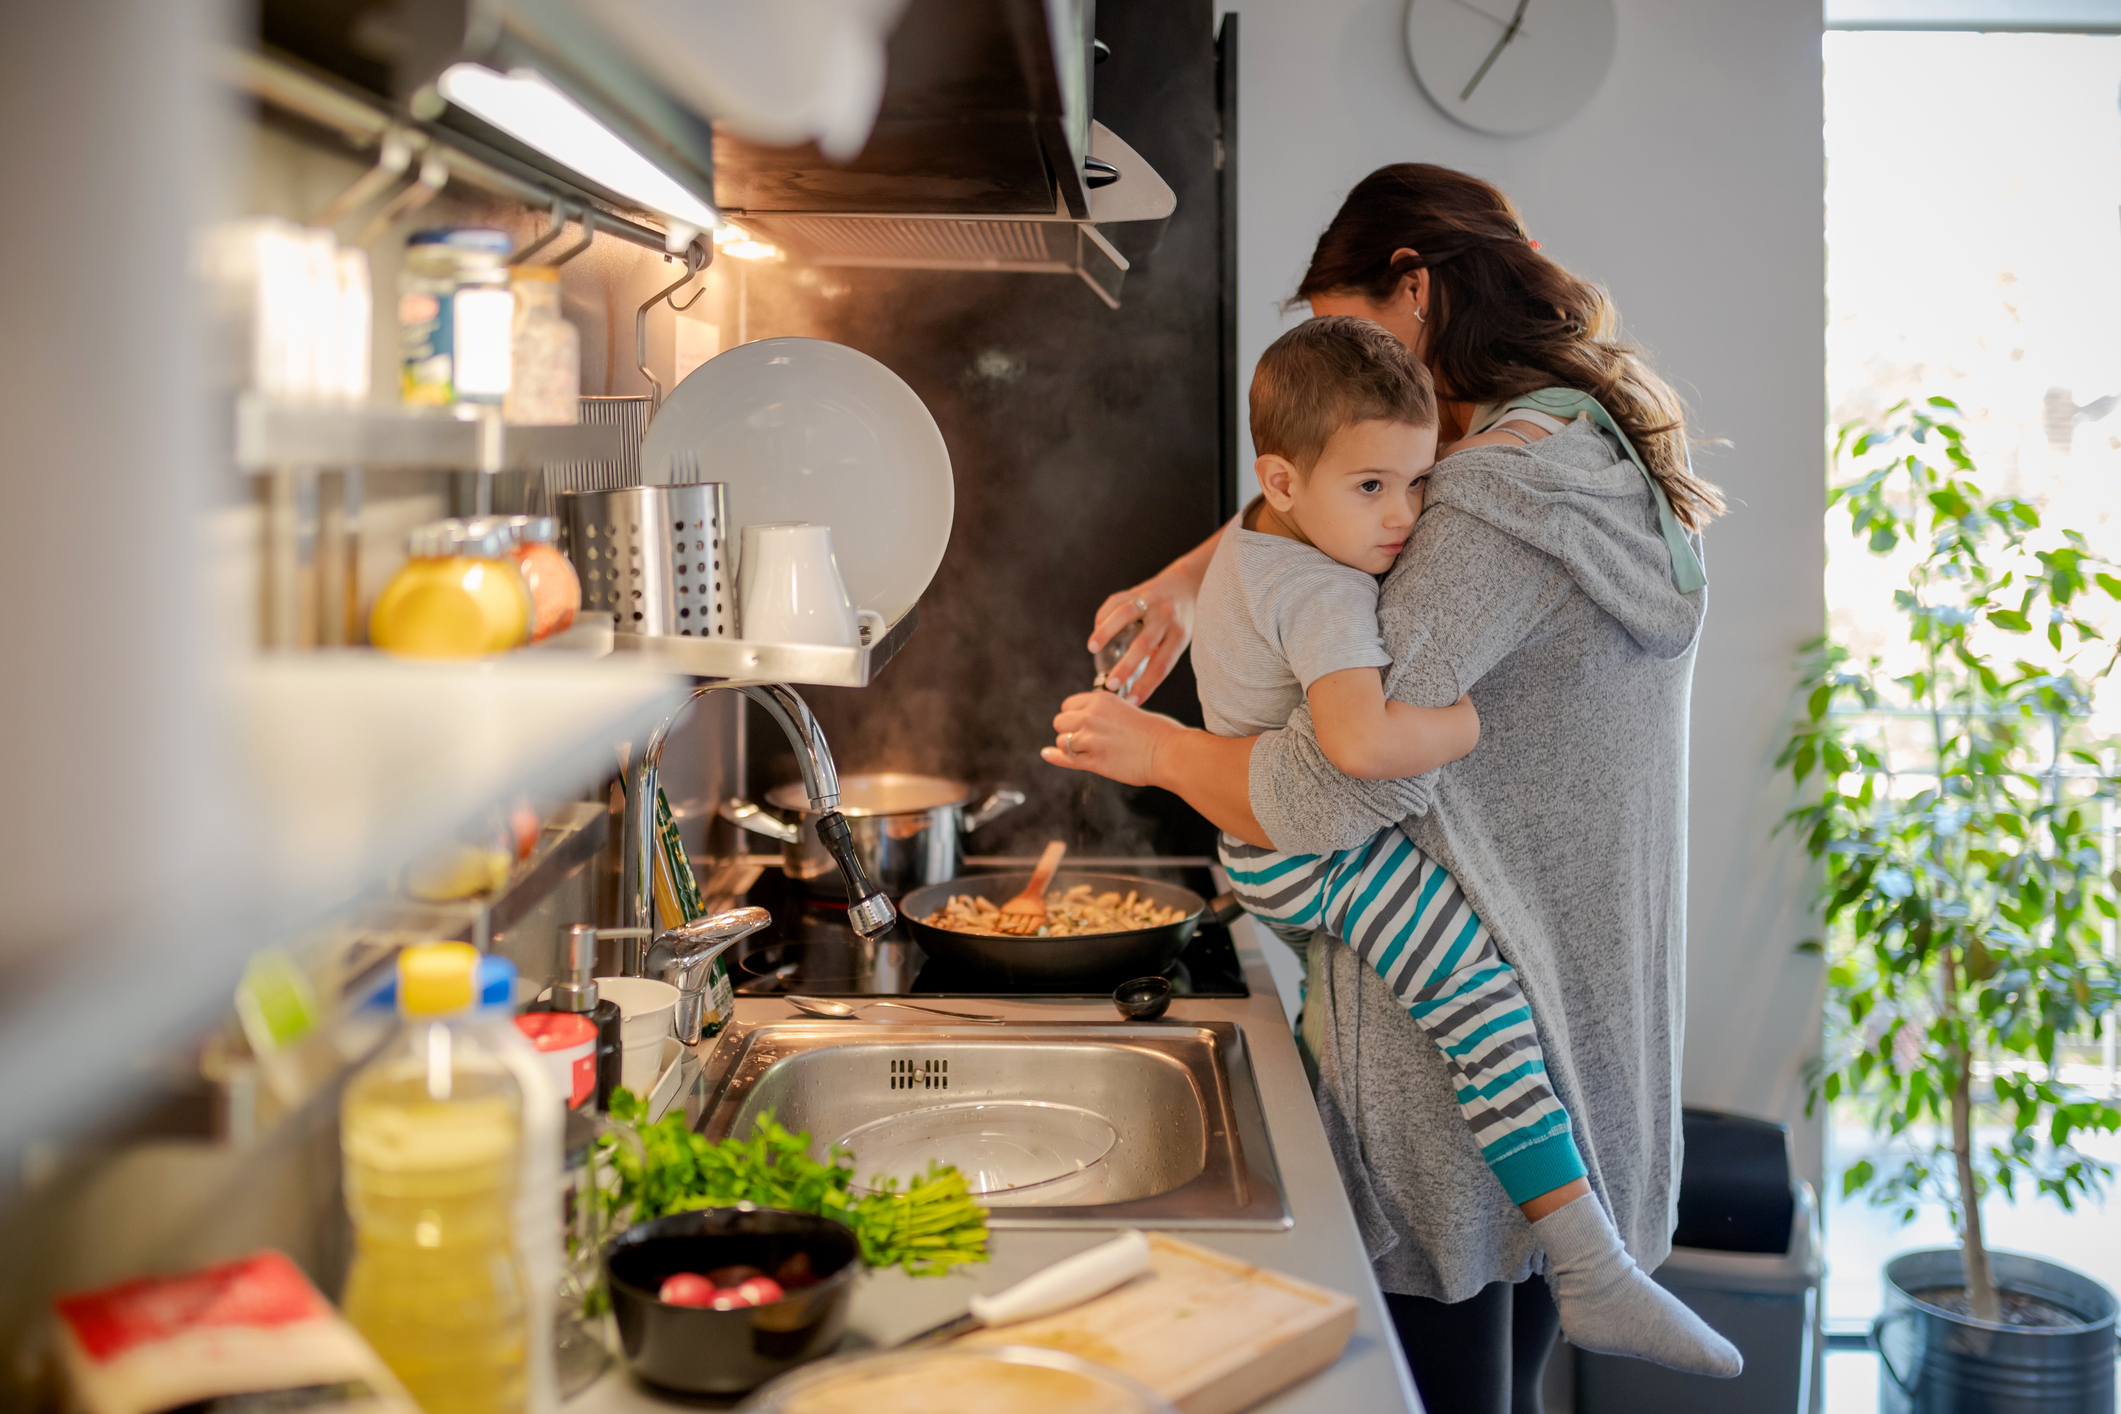 Person cooking while holding a young child in a home kitchen